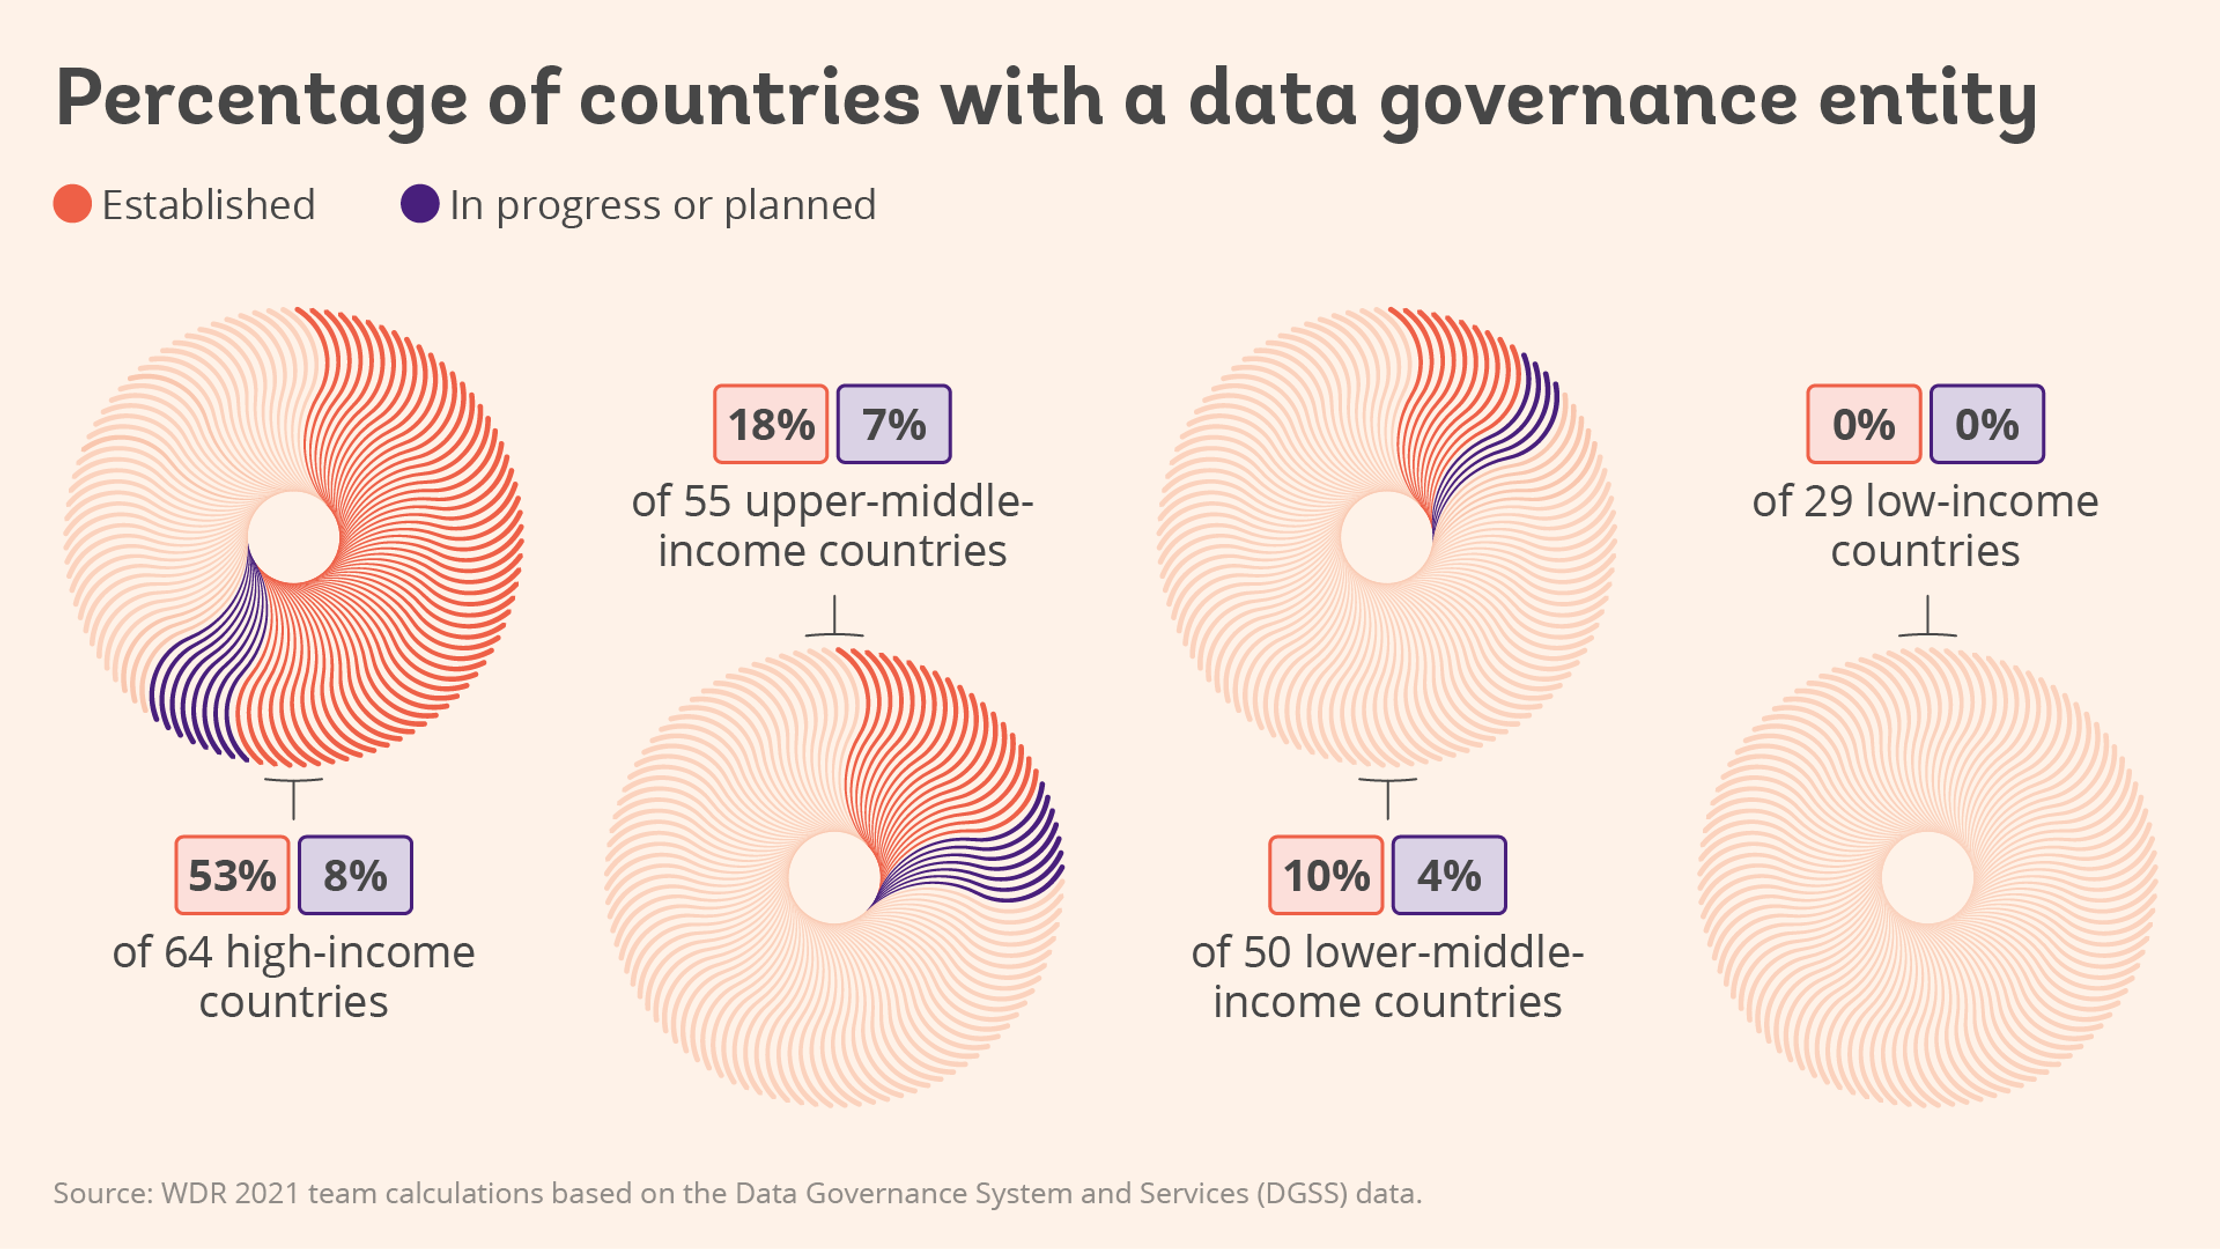 Stylish donut charts showing the percentage of countries with a data governance entity, divided into income groups. While 53% of high-income countries have established entities, there were none in low-income countries.